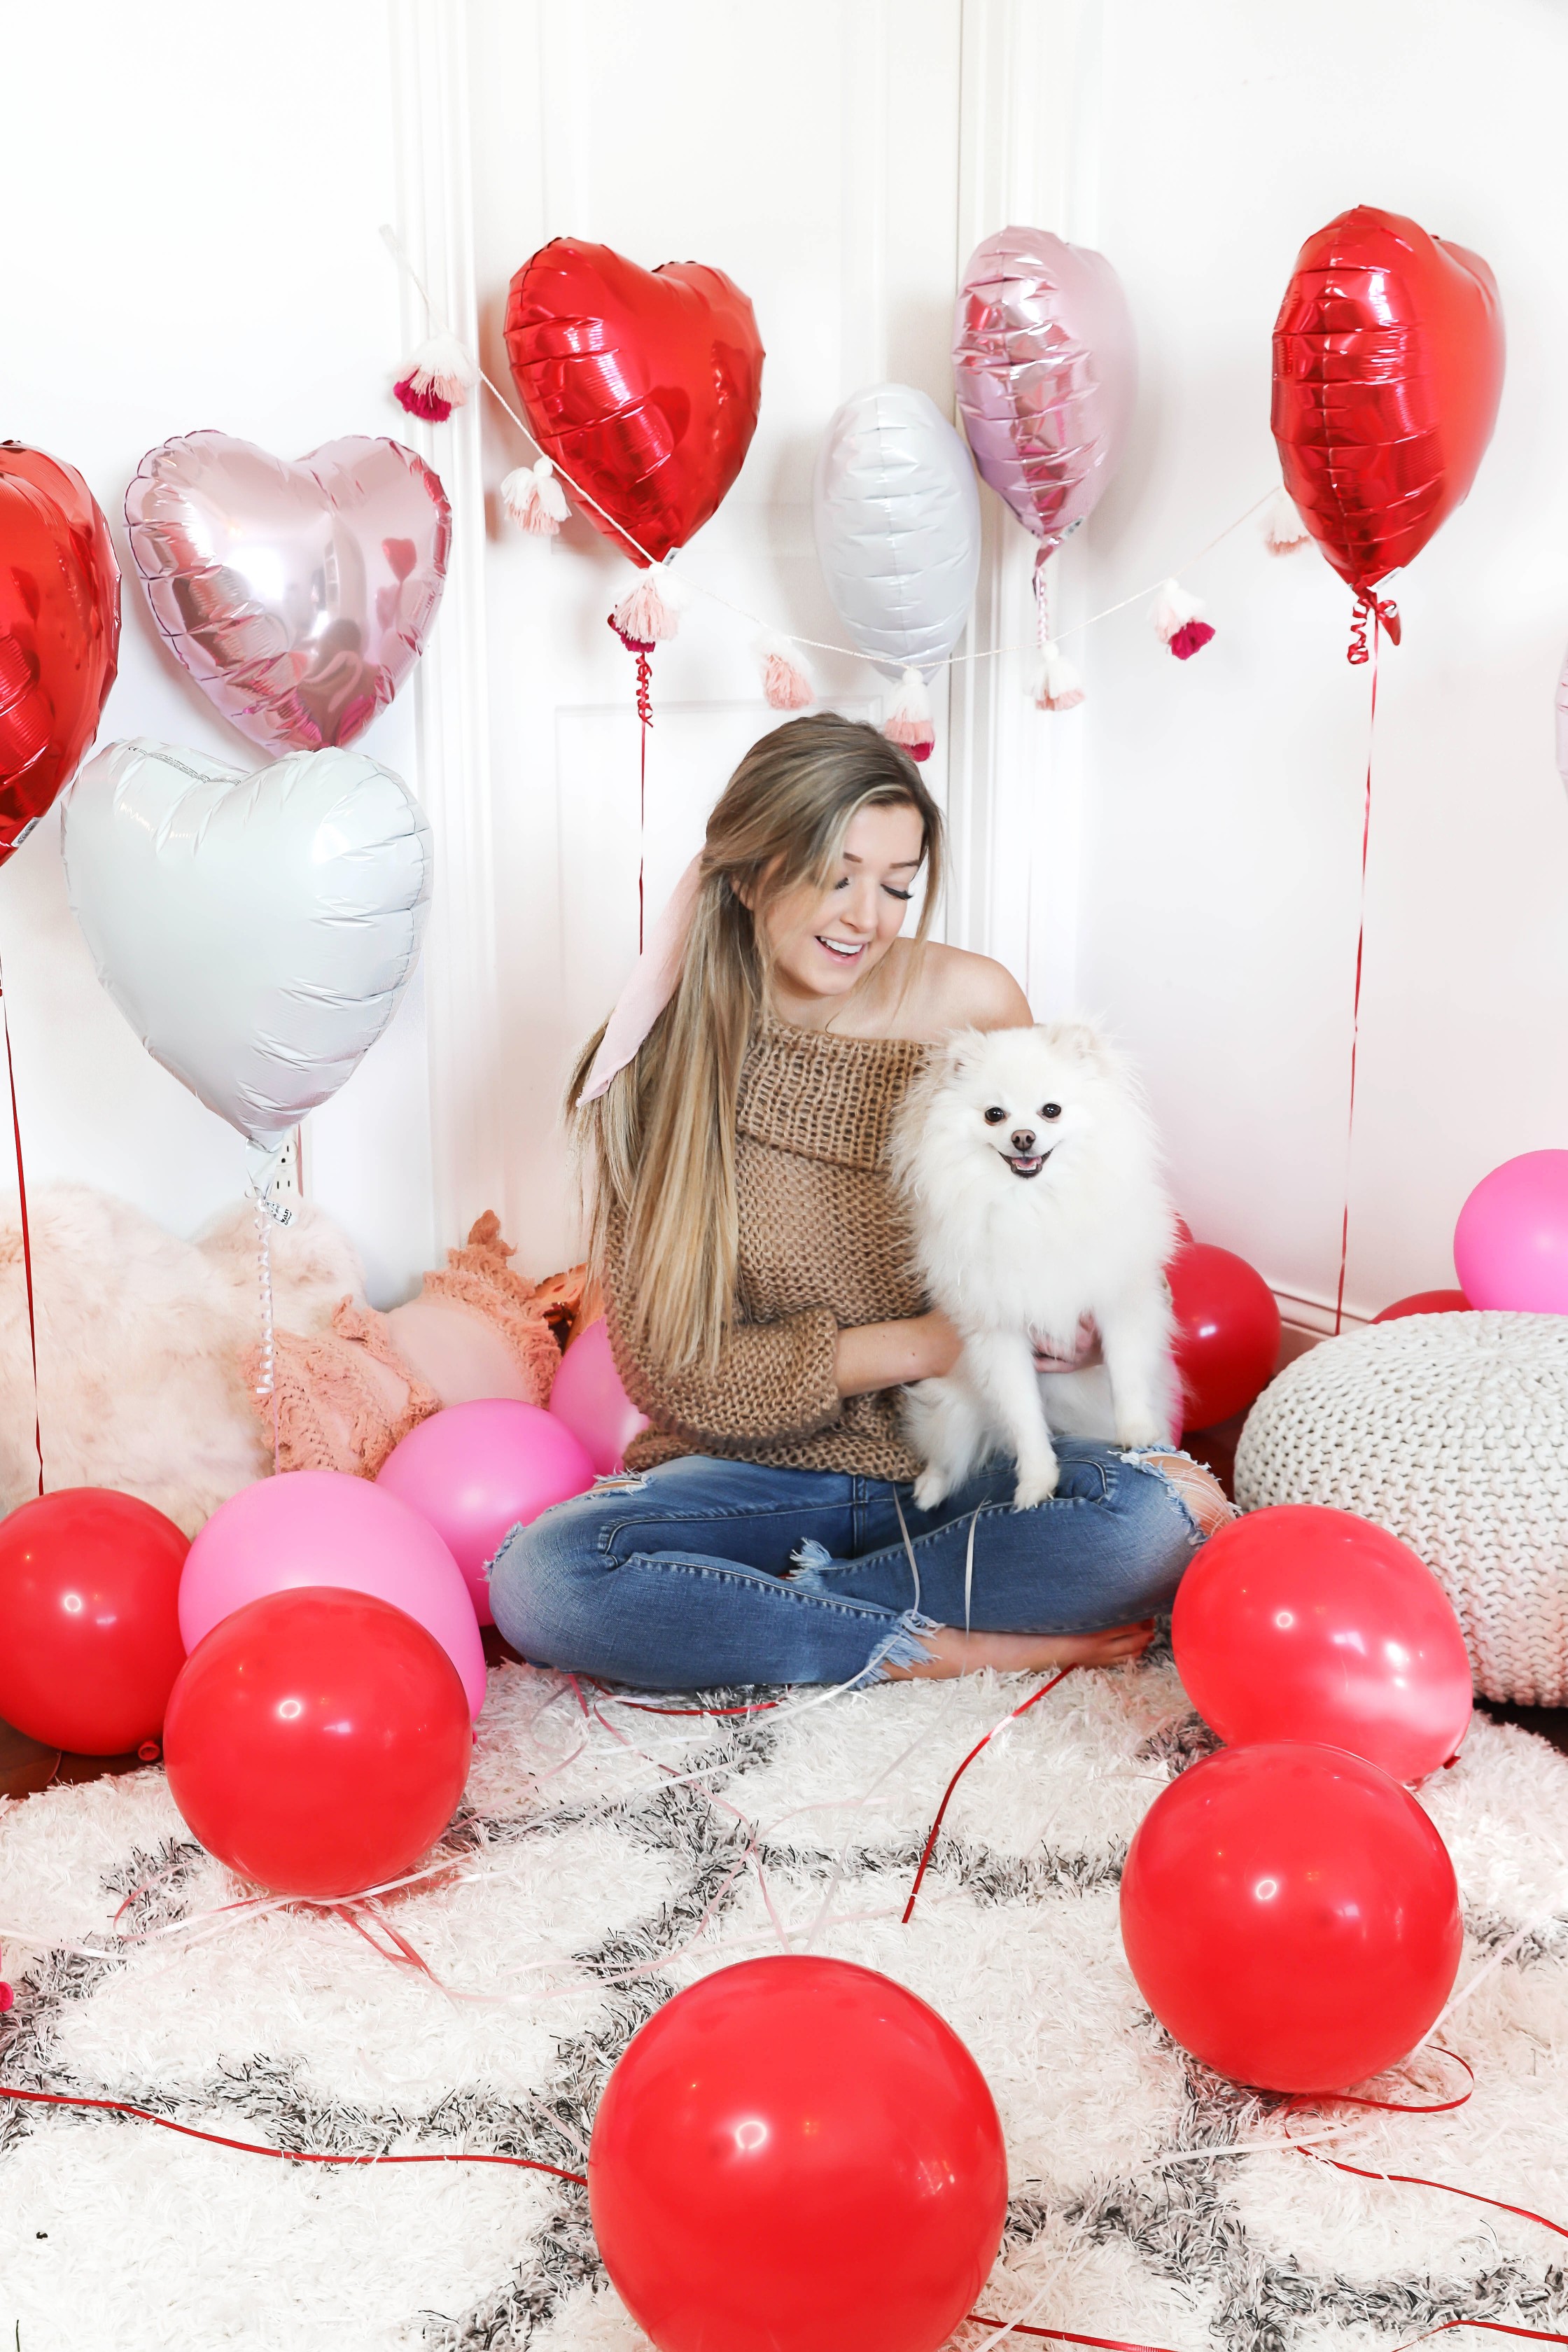 Valentine's Day shoot with the cutest heart shaped balloons and pink and red decor! My cute little pomeranian puppy dog made an appearance in the pics! I am wearing the cutest, tan, off the shoulder sweater from amazon and the cutest ripped denim from Red Dress Boutique! Details on style and fashion blog daily dose of charm by lauren lindmark